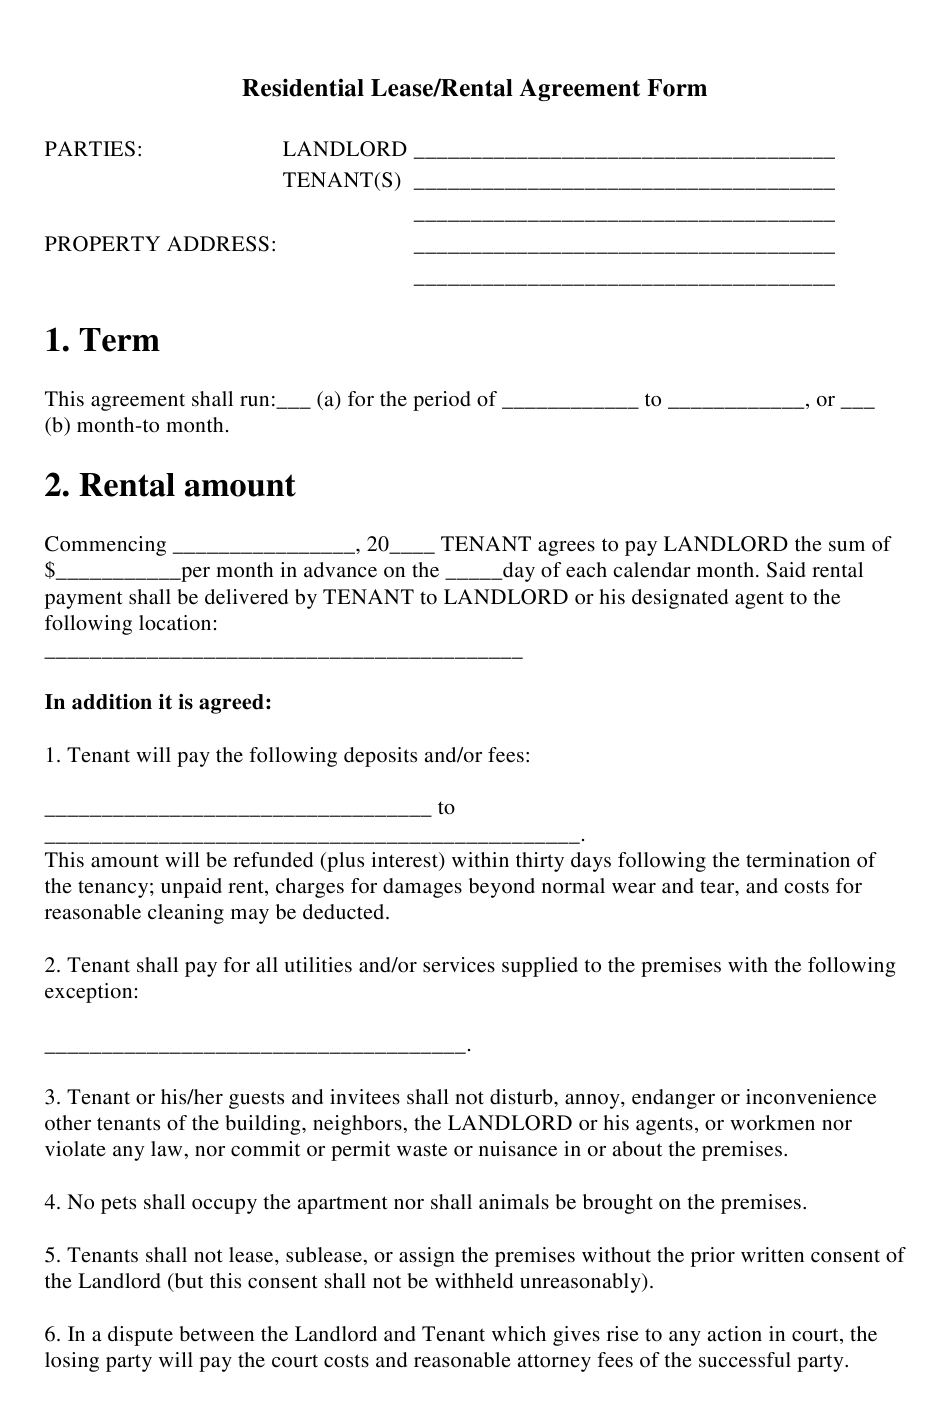 Residential Lease Rental Agreement Template Download Printable PDF 